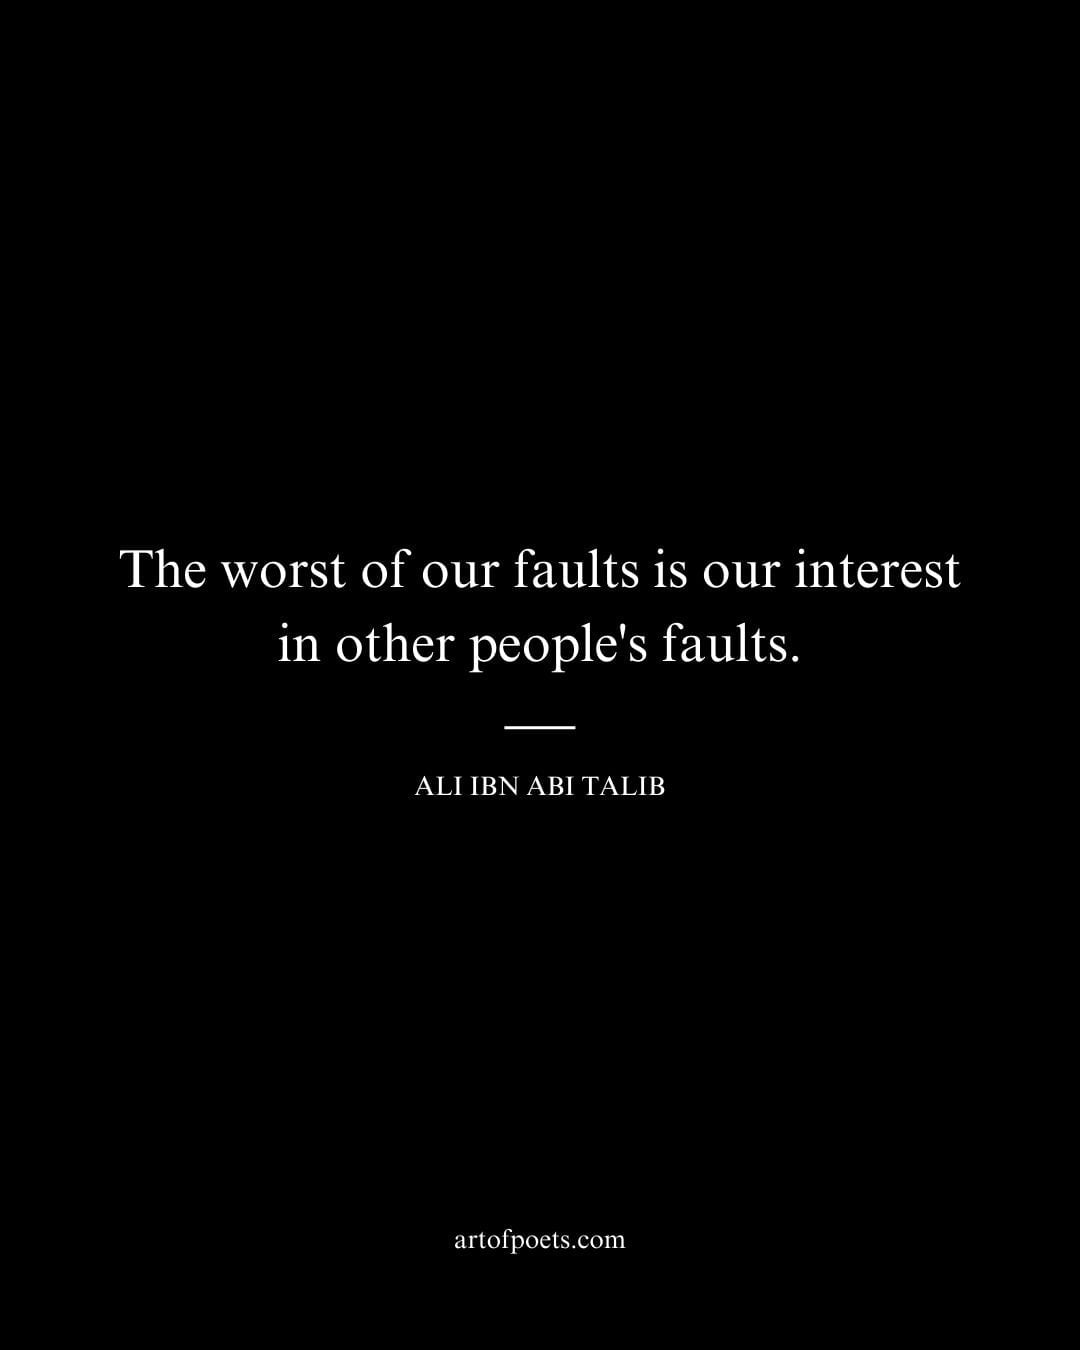 The worst of our faults is our interest in other peoples faults